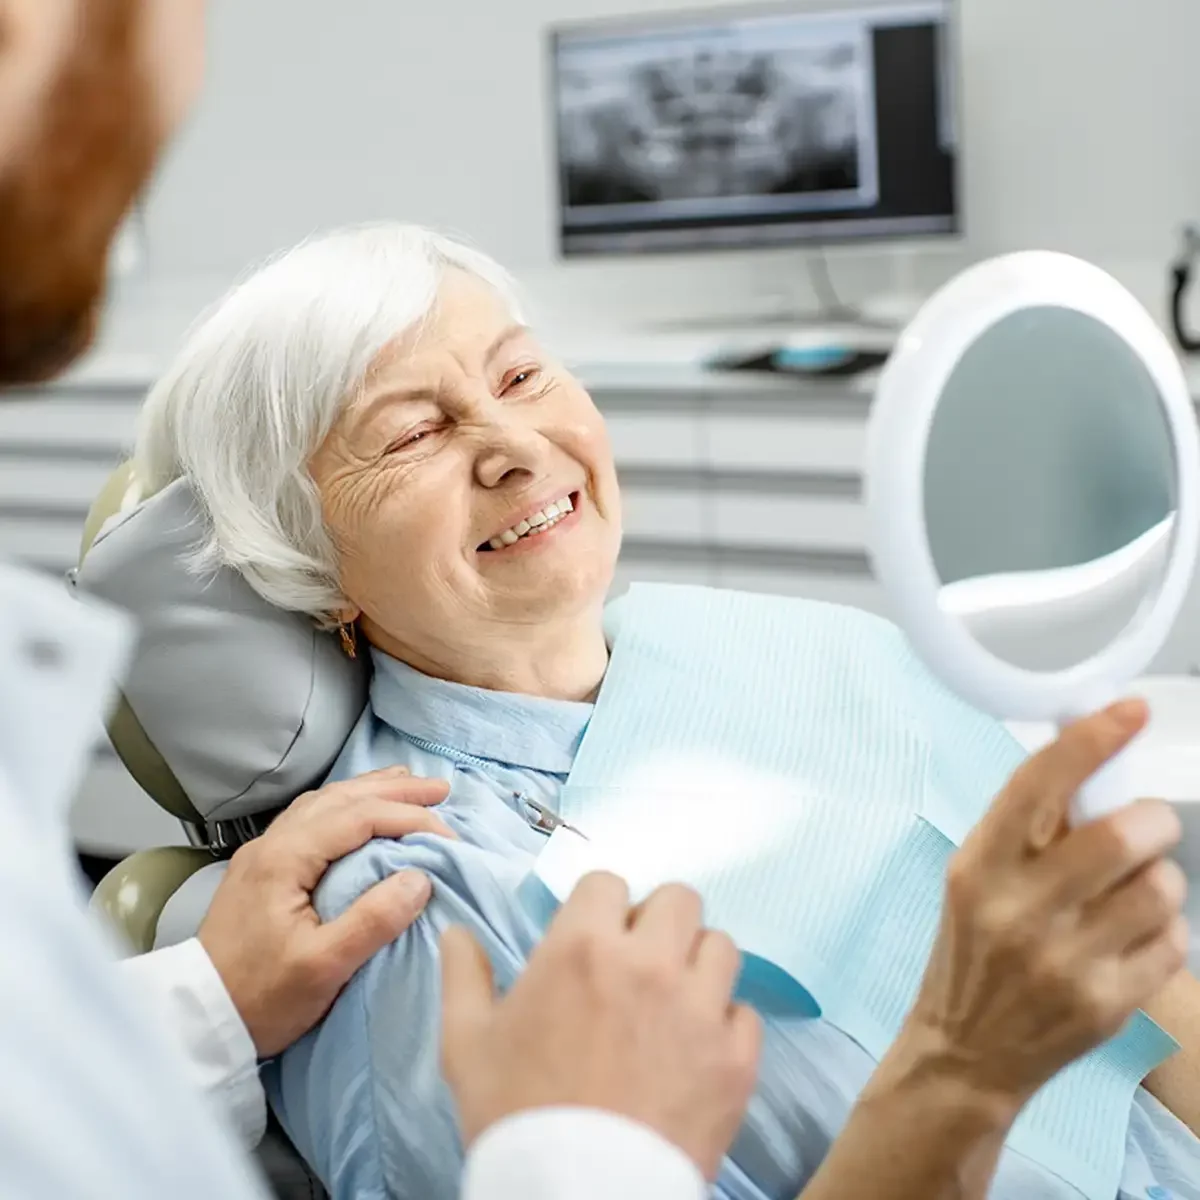 A woman with dentures smiles contently in a dentist chair, showcasing the importance of dental care